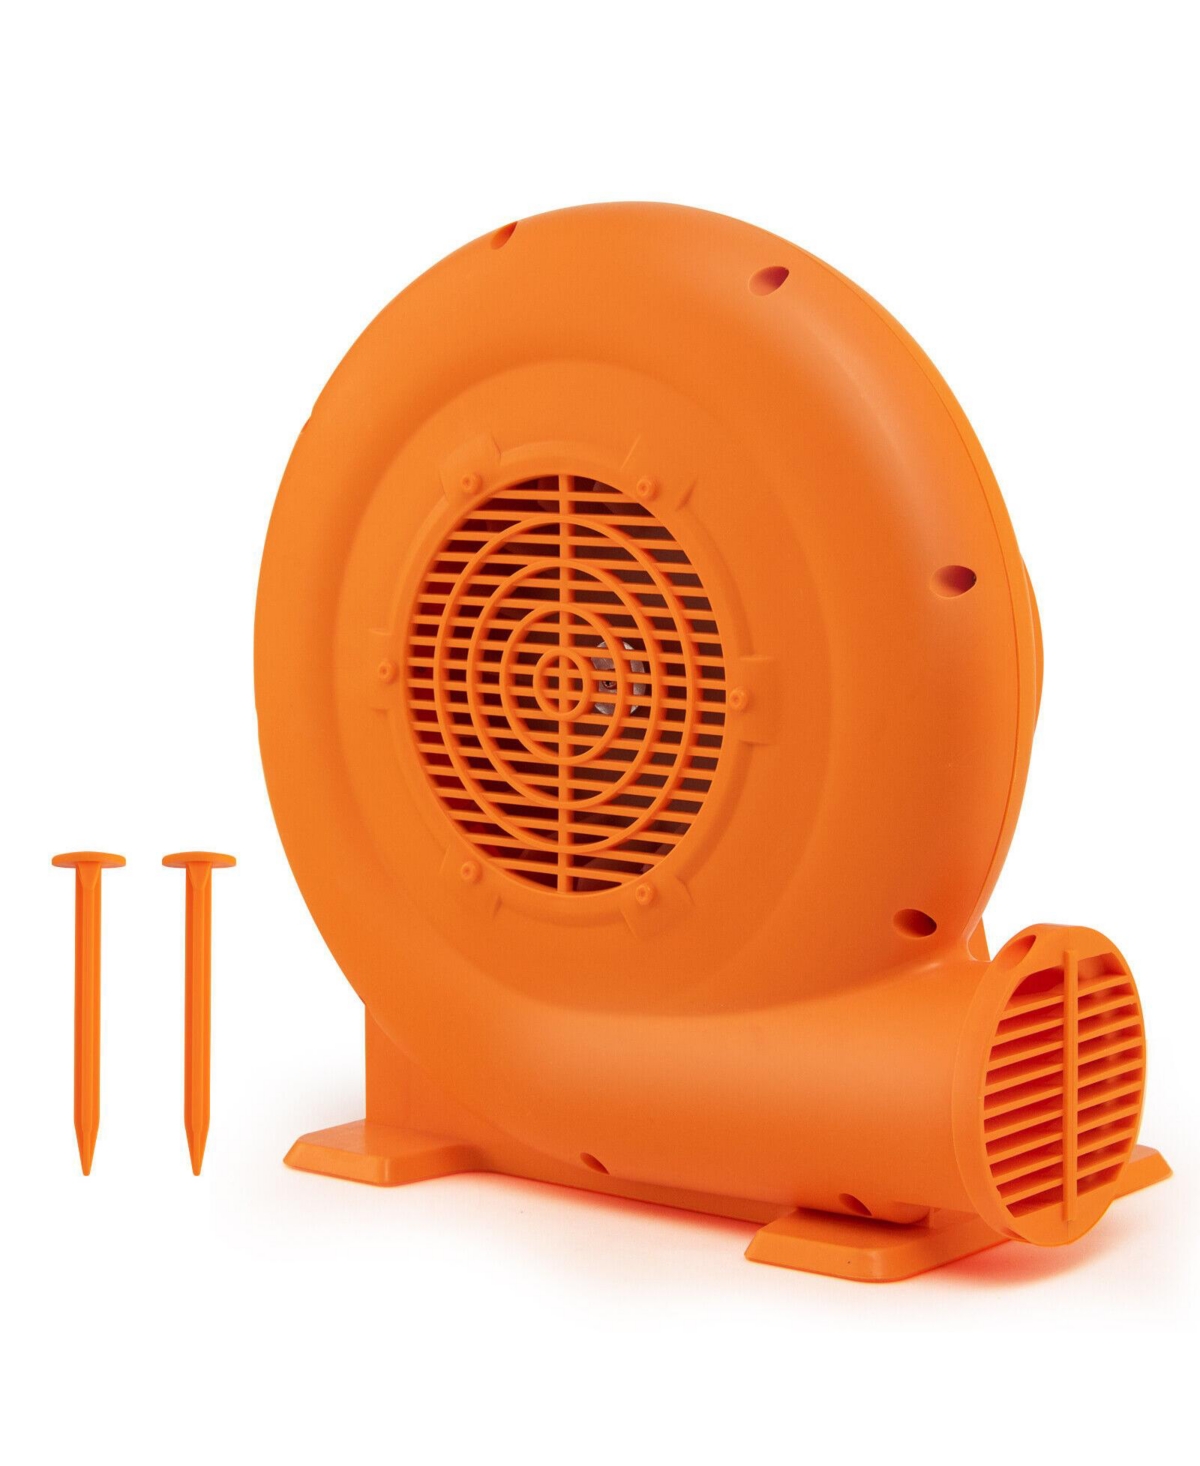 0.5HP/0.7HP/1.0HP Air Blower for Inflatables with 25 feet Wire and Gfci Plug-1.0HP - Orange